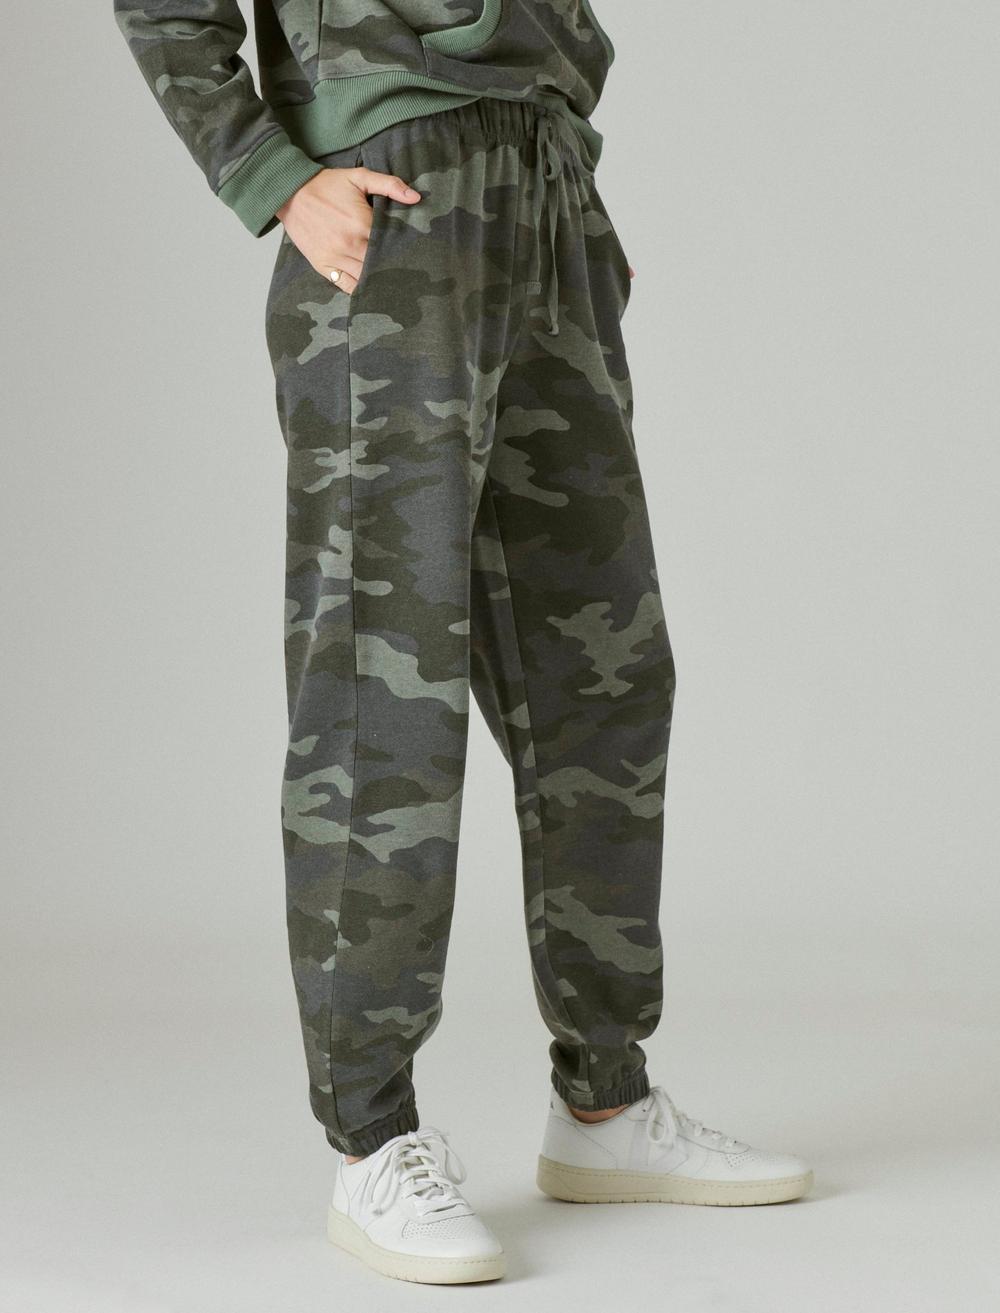 CHILL AT HOME FLEECE JOGGER, image 5